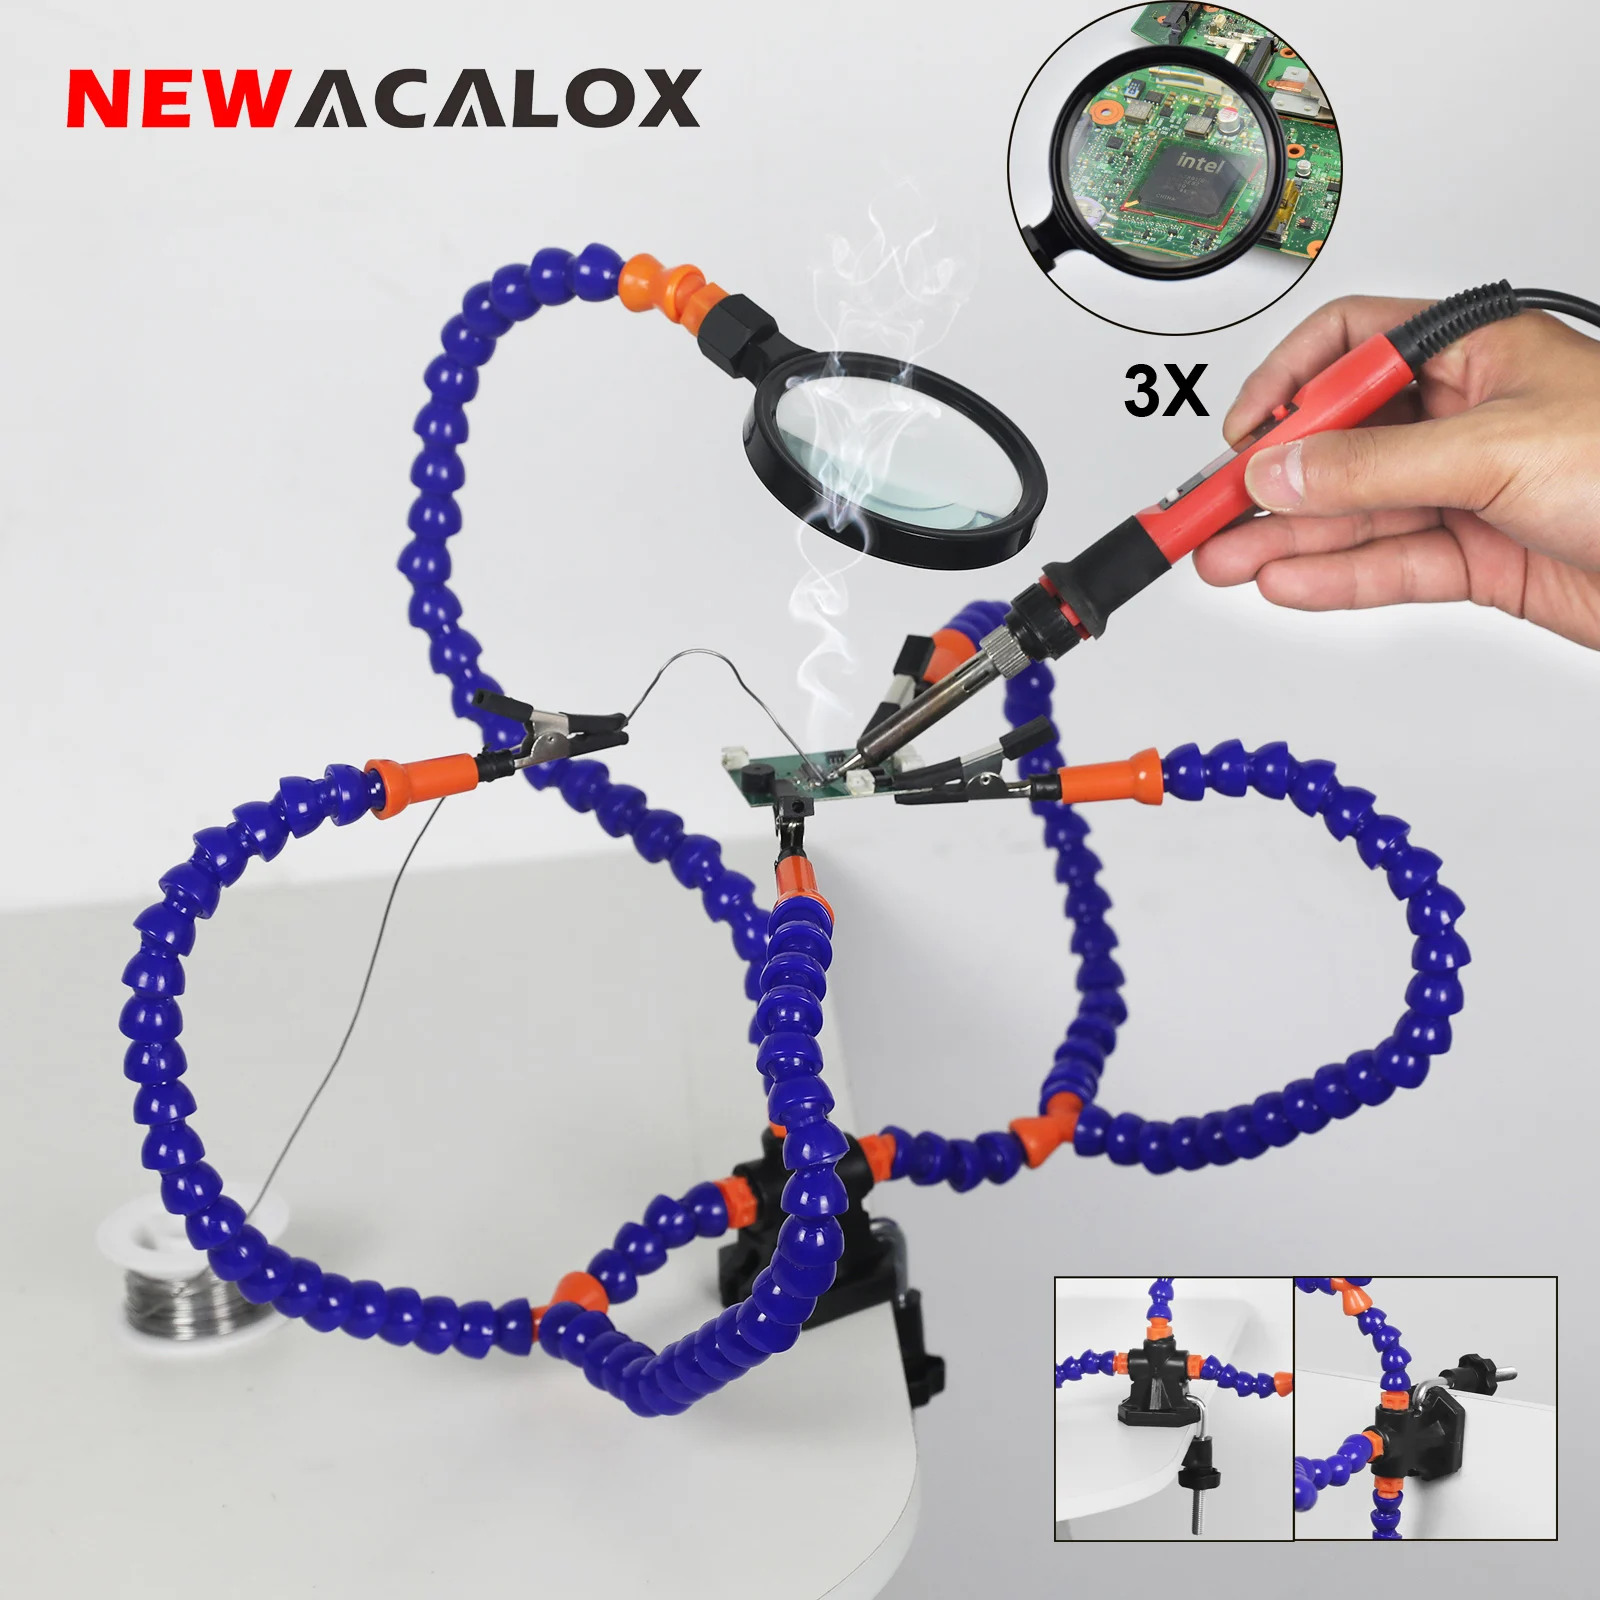 

NEWACALOX Table Clamp Soldering Third Hand Helping Hans with 3X Magnifier 5Pcs Flexible Arms PCB Holder Welding Repair Tool